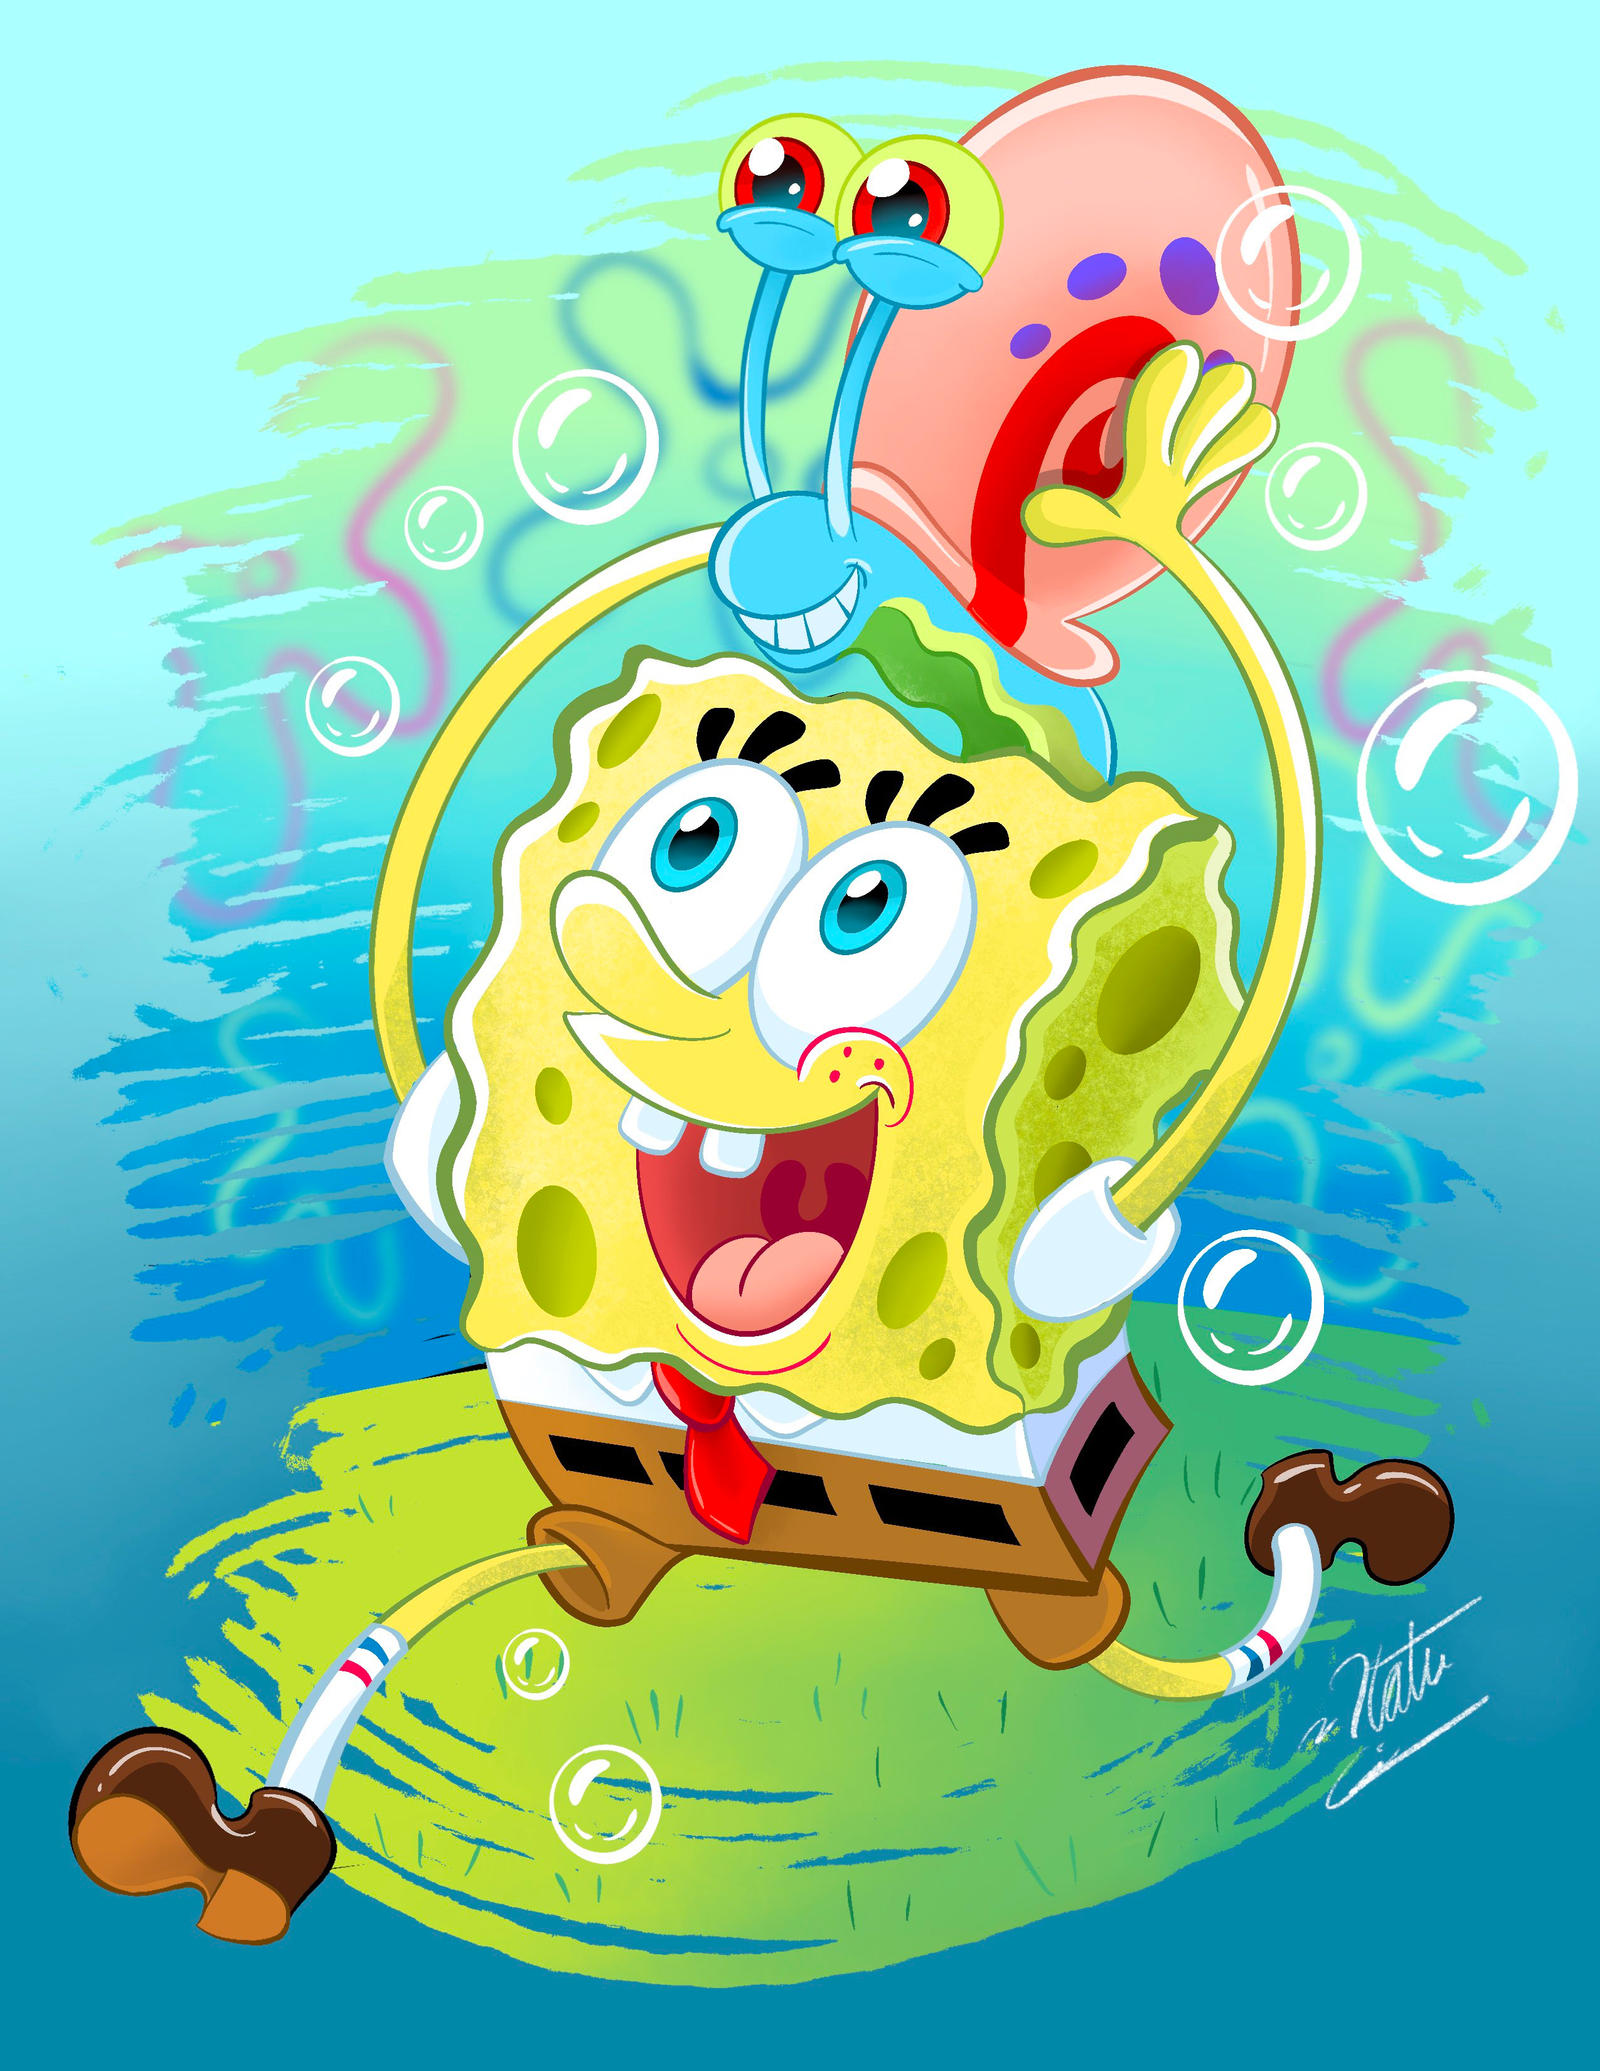 Spongebob and Gary by Pinto-Beans on DeviantArt